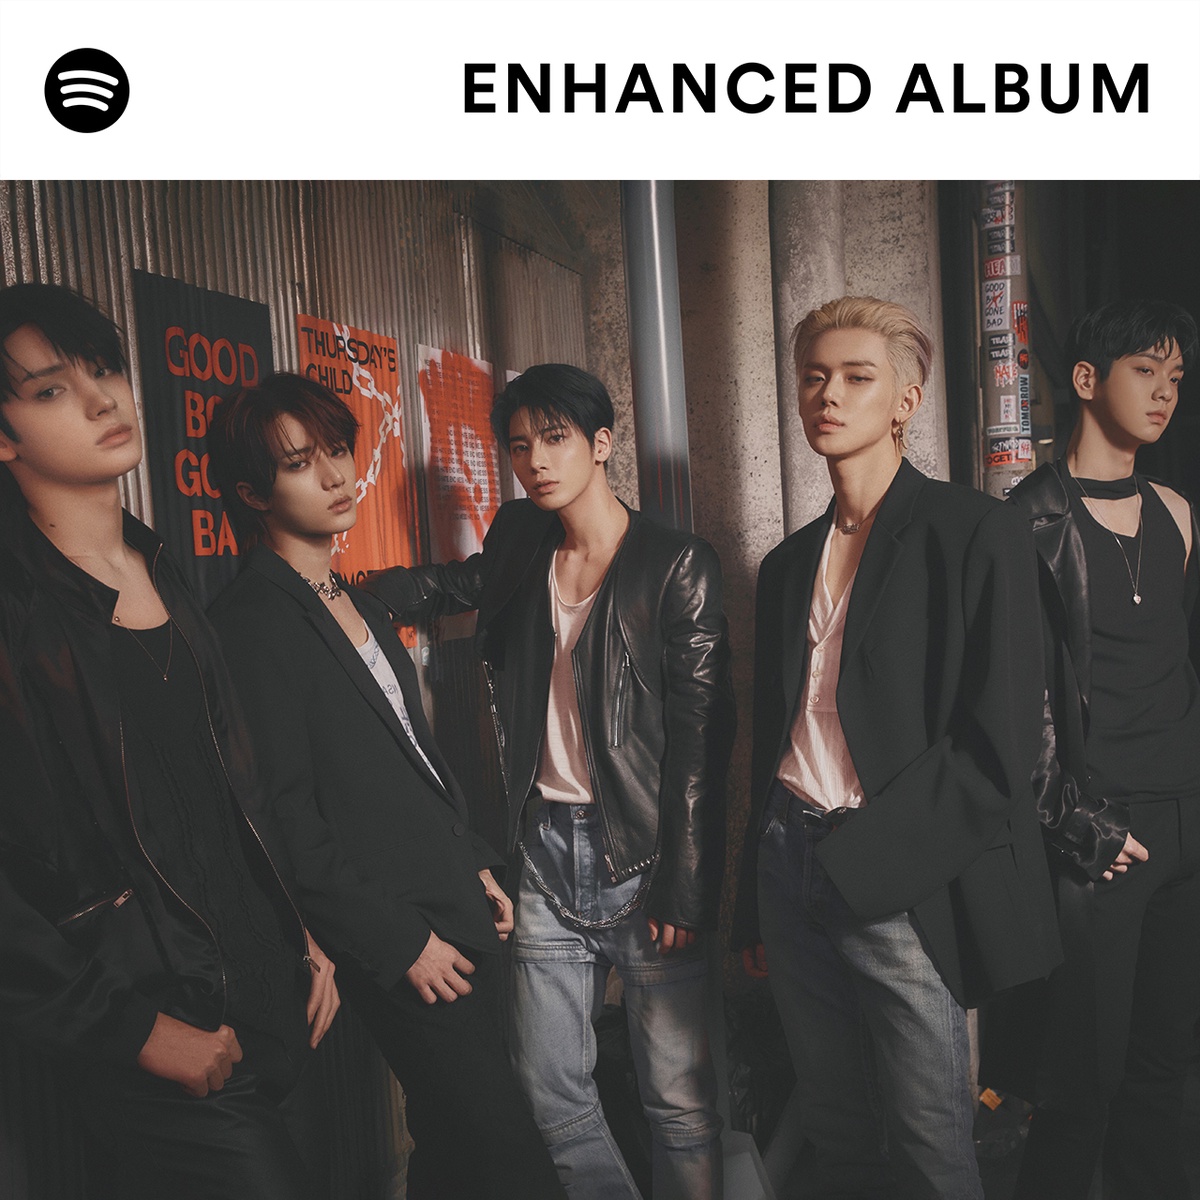 Spotify and TOMORROW X TOGETHER to release the Enhanced Album on May 9